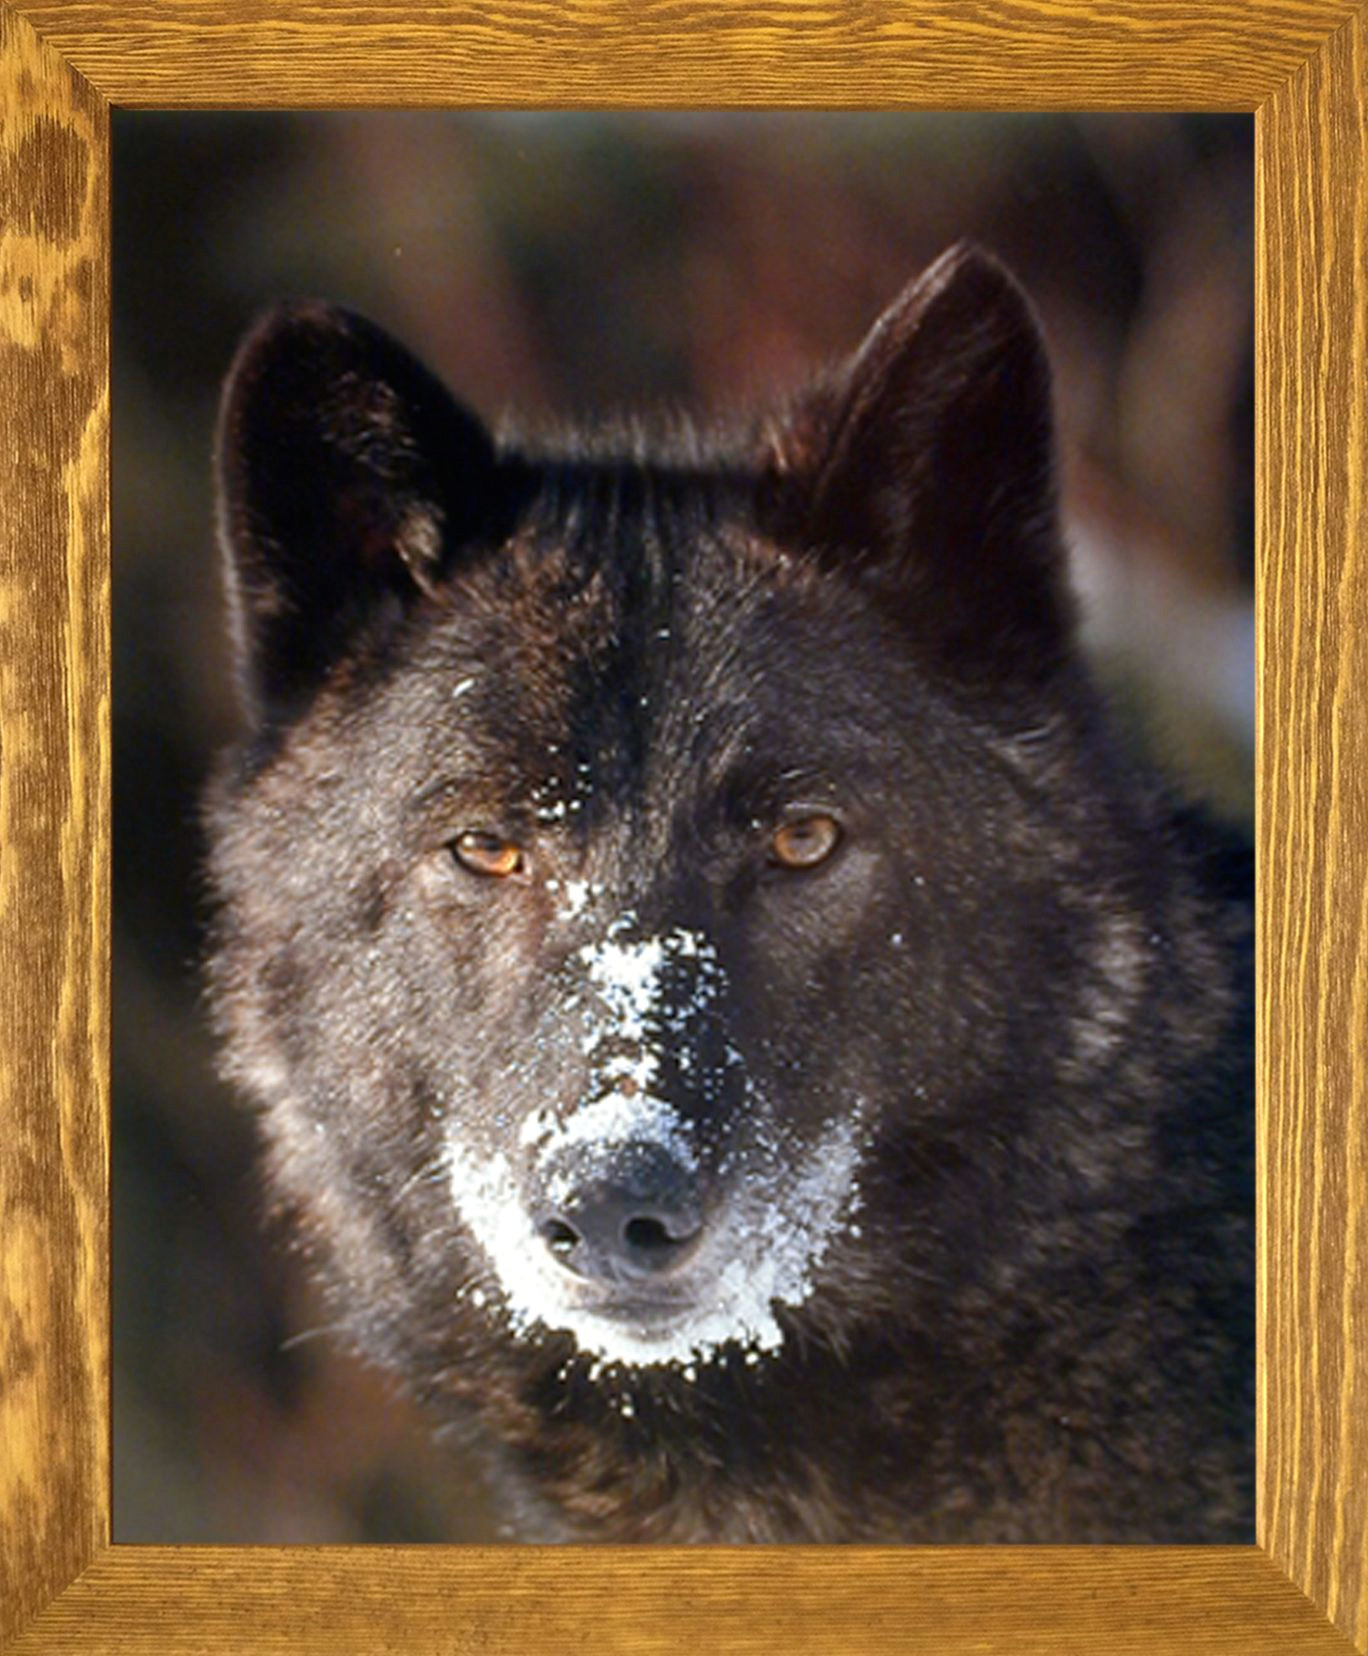 Drawing Of A Timber Wolf Add This Black Wolf Wild Animal Art Print Framed Poster In Your Home